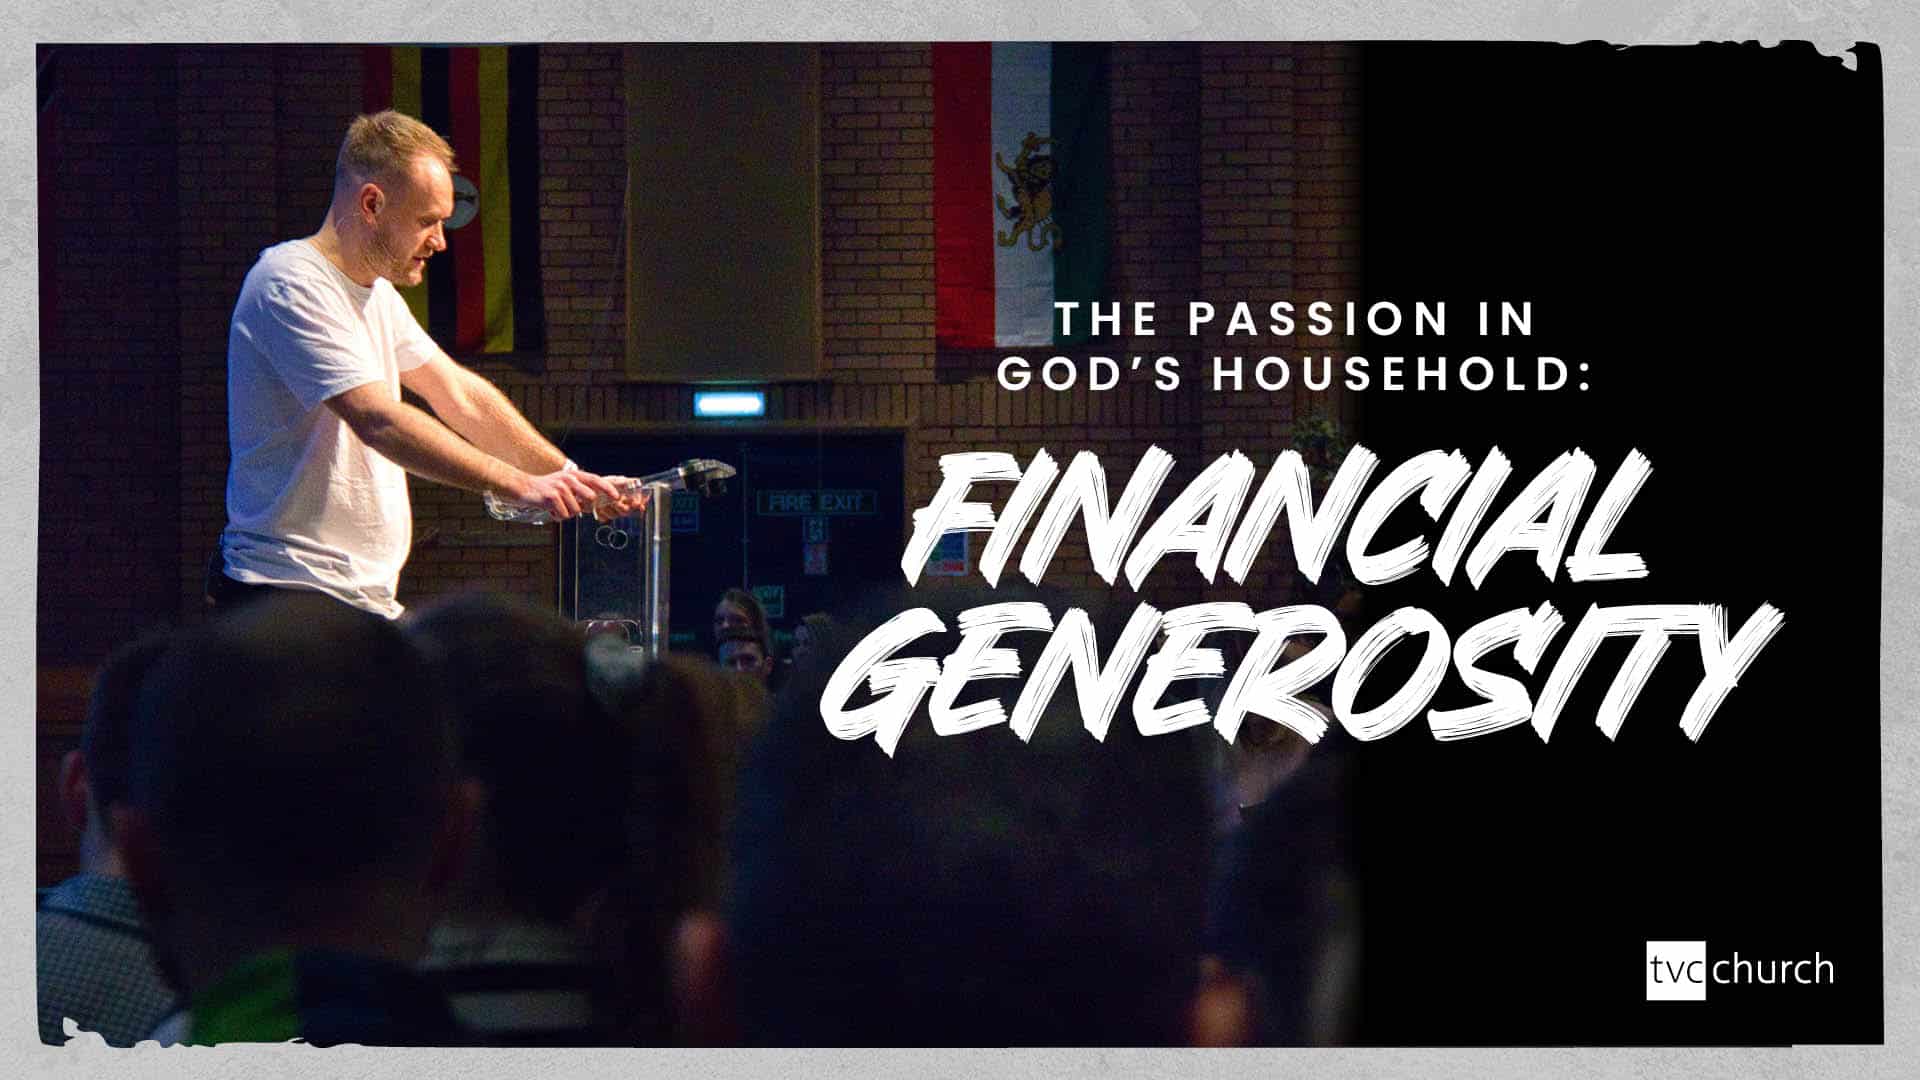 The Passion in God’s Household: Financial Generosity